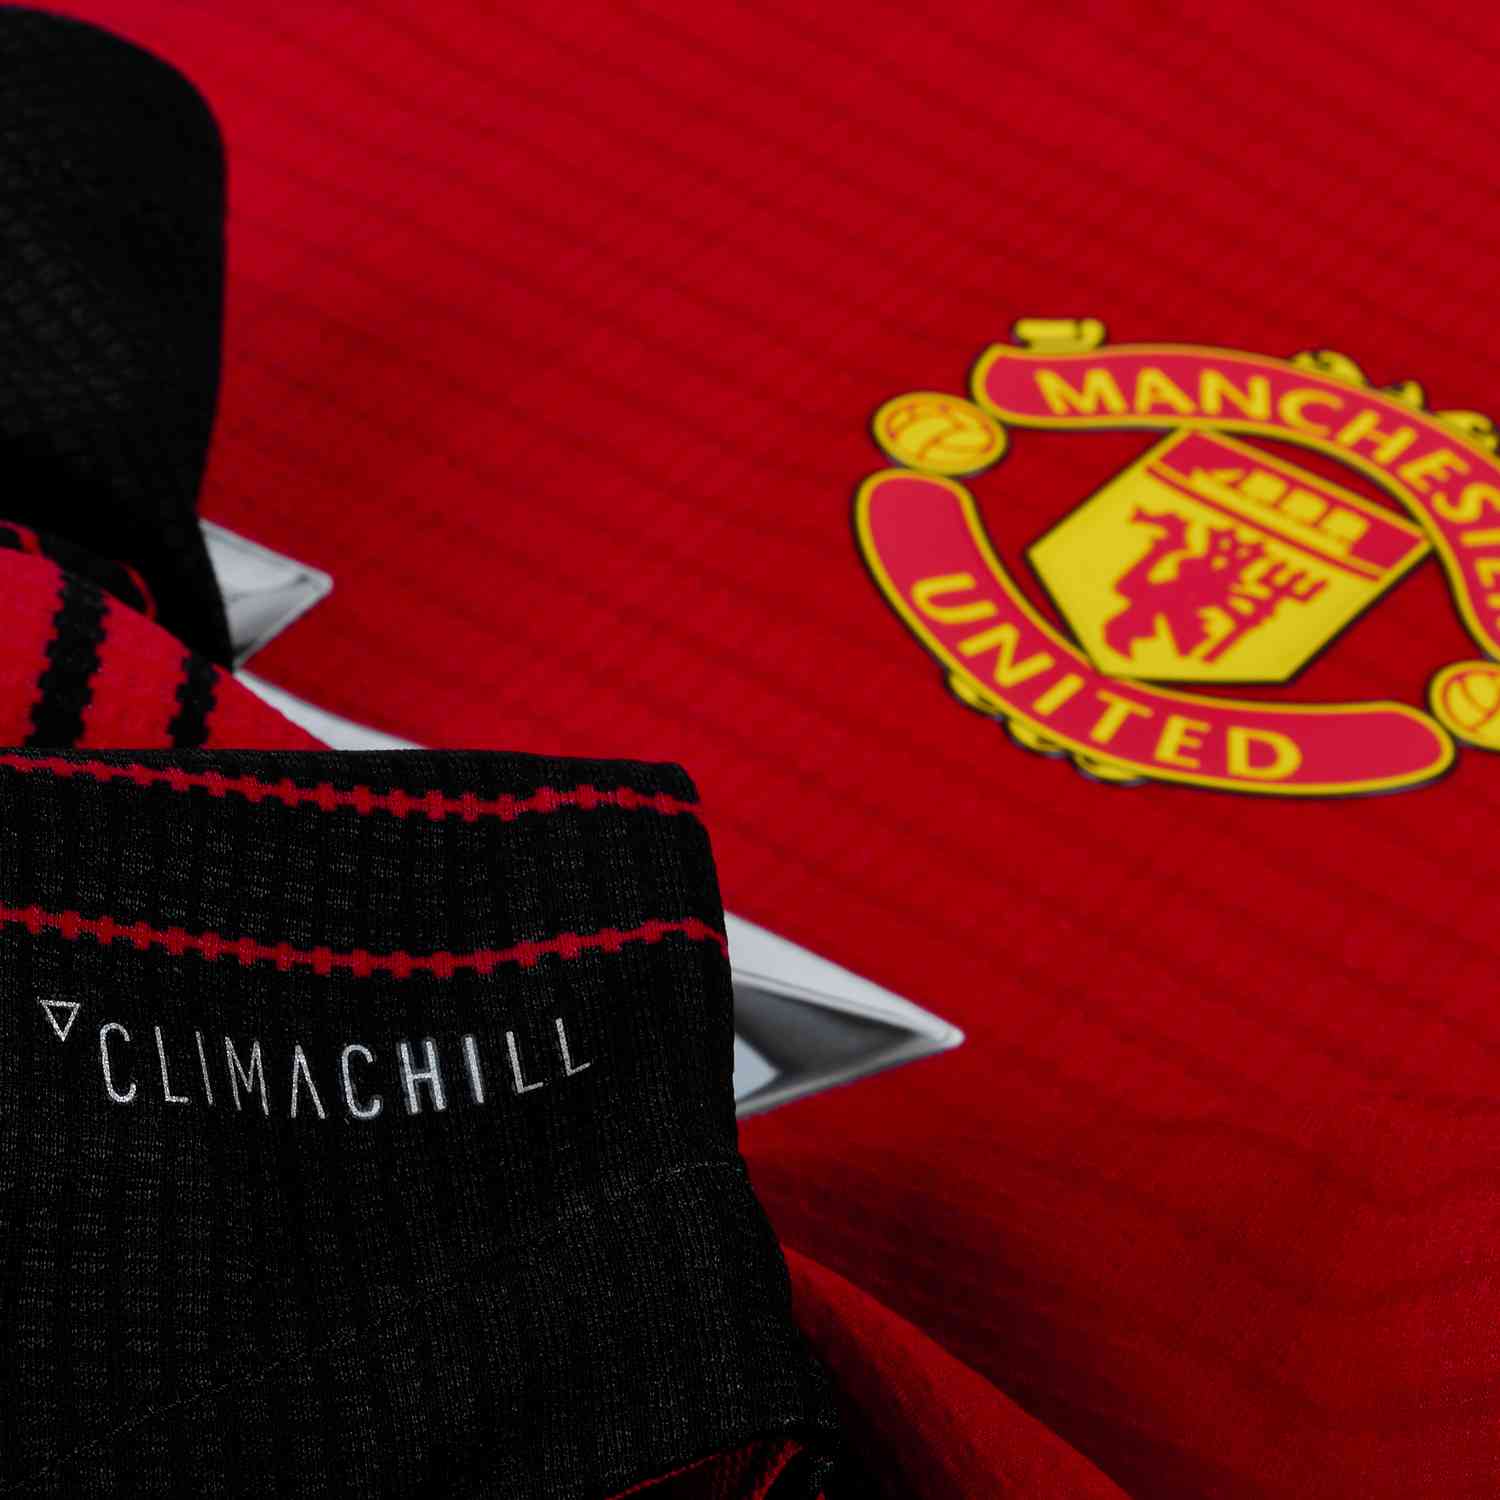 climachill manchester united